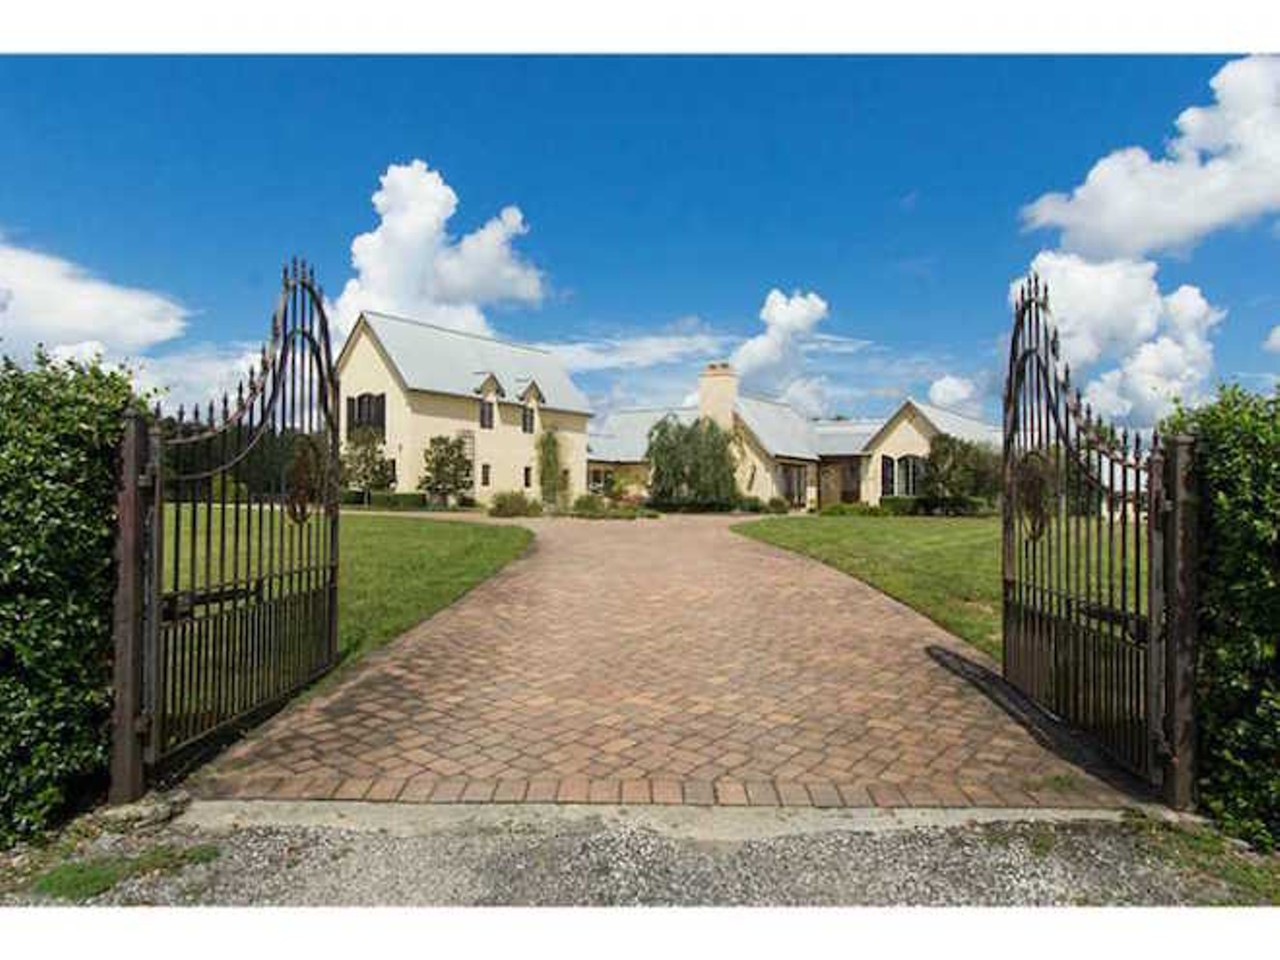 4405 W. Kelly Park Road, Apopka: This one is also a horse farm, but much less expensive at $1,999,950.